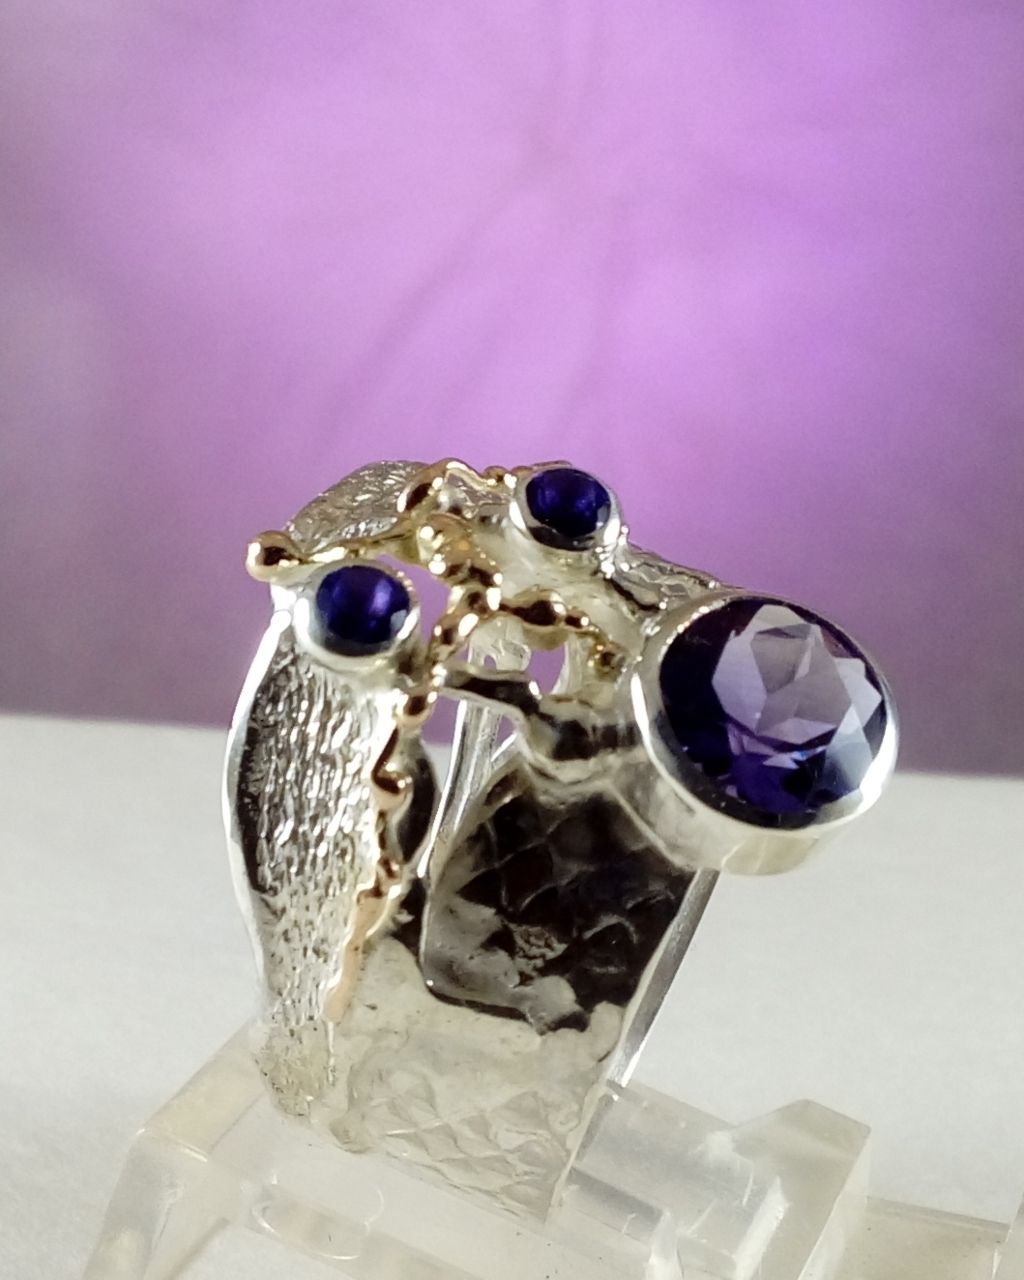 rings for women with amethysts, sterling and 14k gold jewelry, where to buy jewelry made by artist, where to buy handmade jewelry with amethyst, silver and gold rings for women with amethyst, gregory pyra piro ring 6820